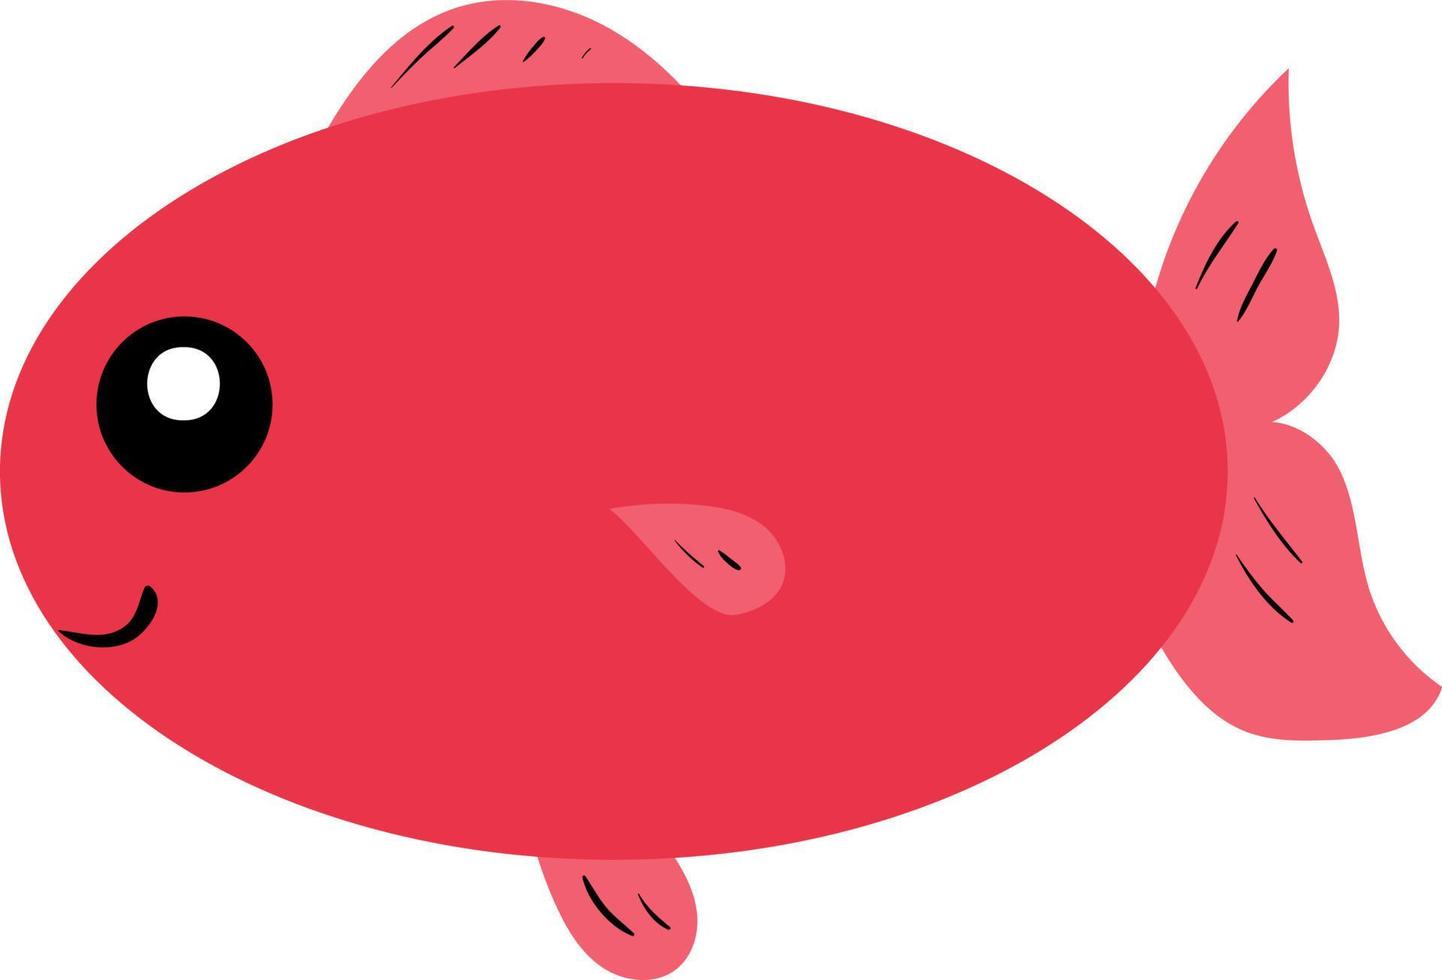 Red fish, illustration, vector on white background.